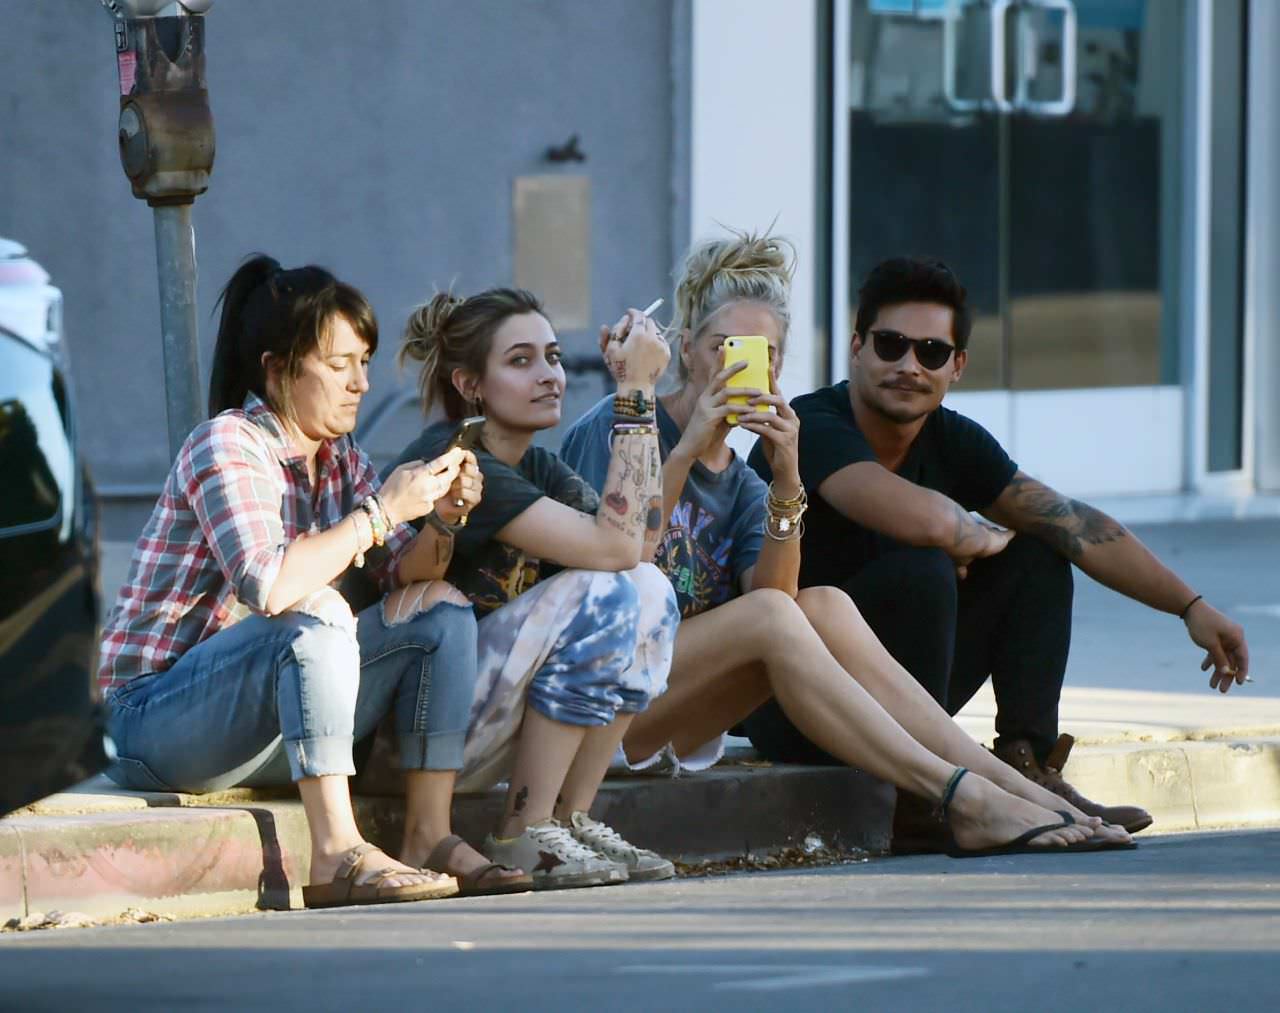 paris jackson in a peace sign t shirt as she smokes with friends 2